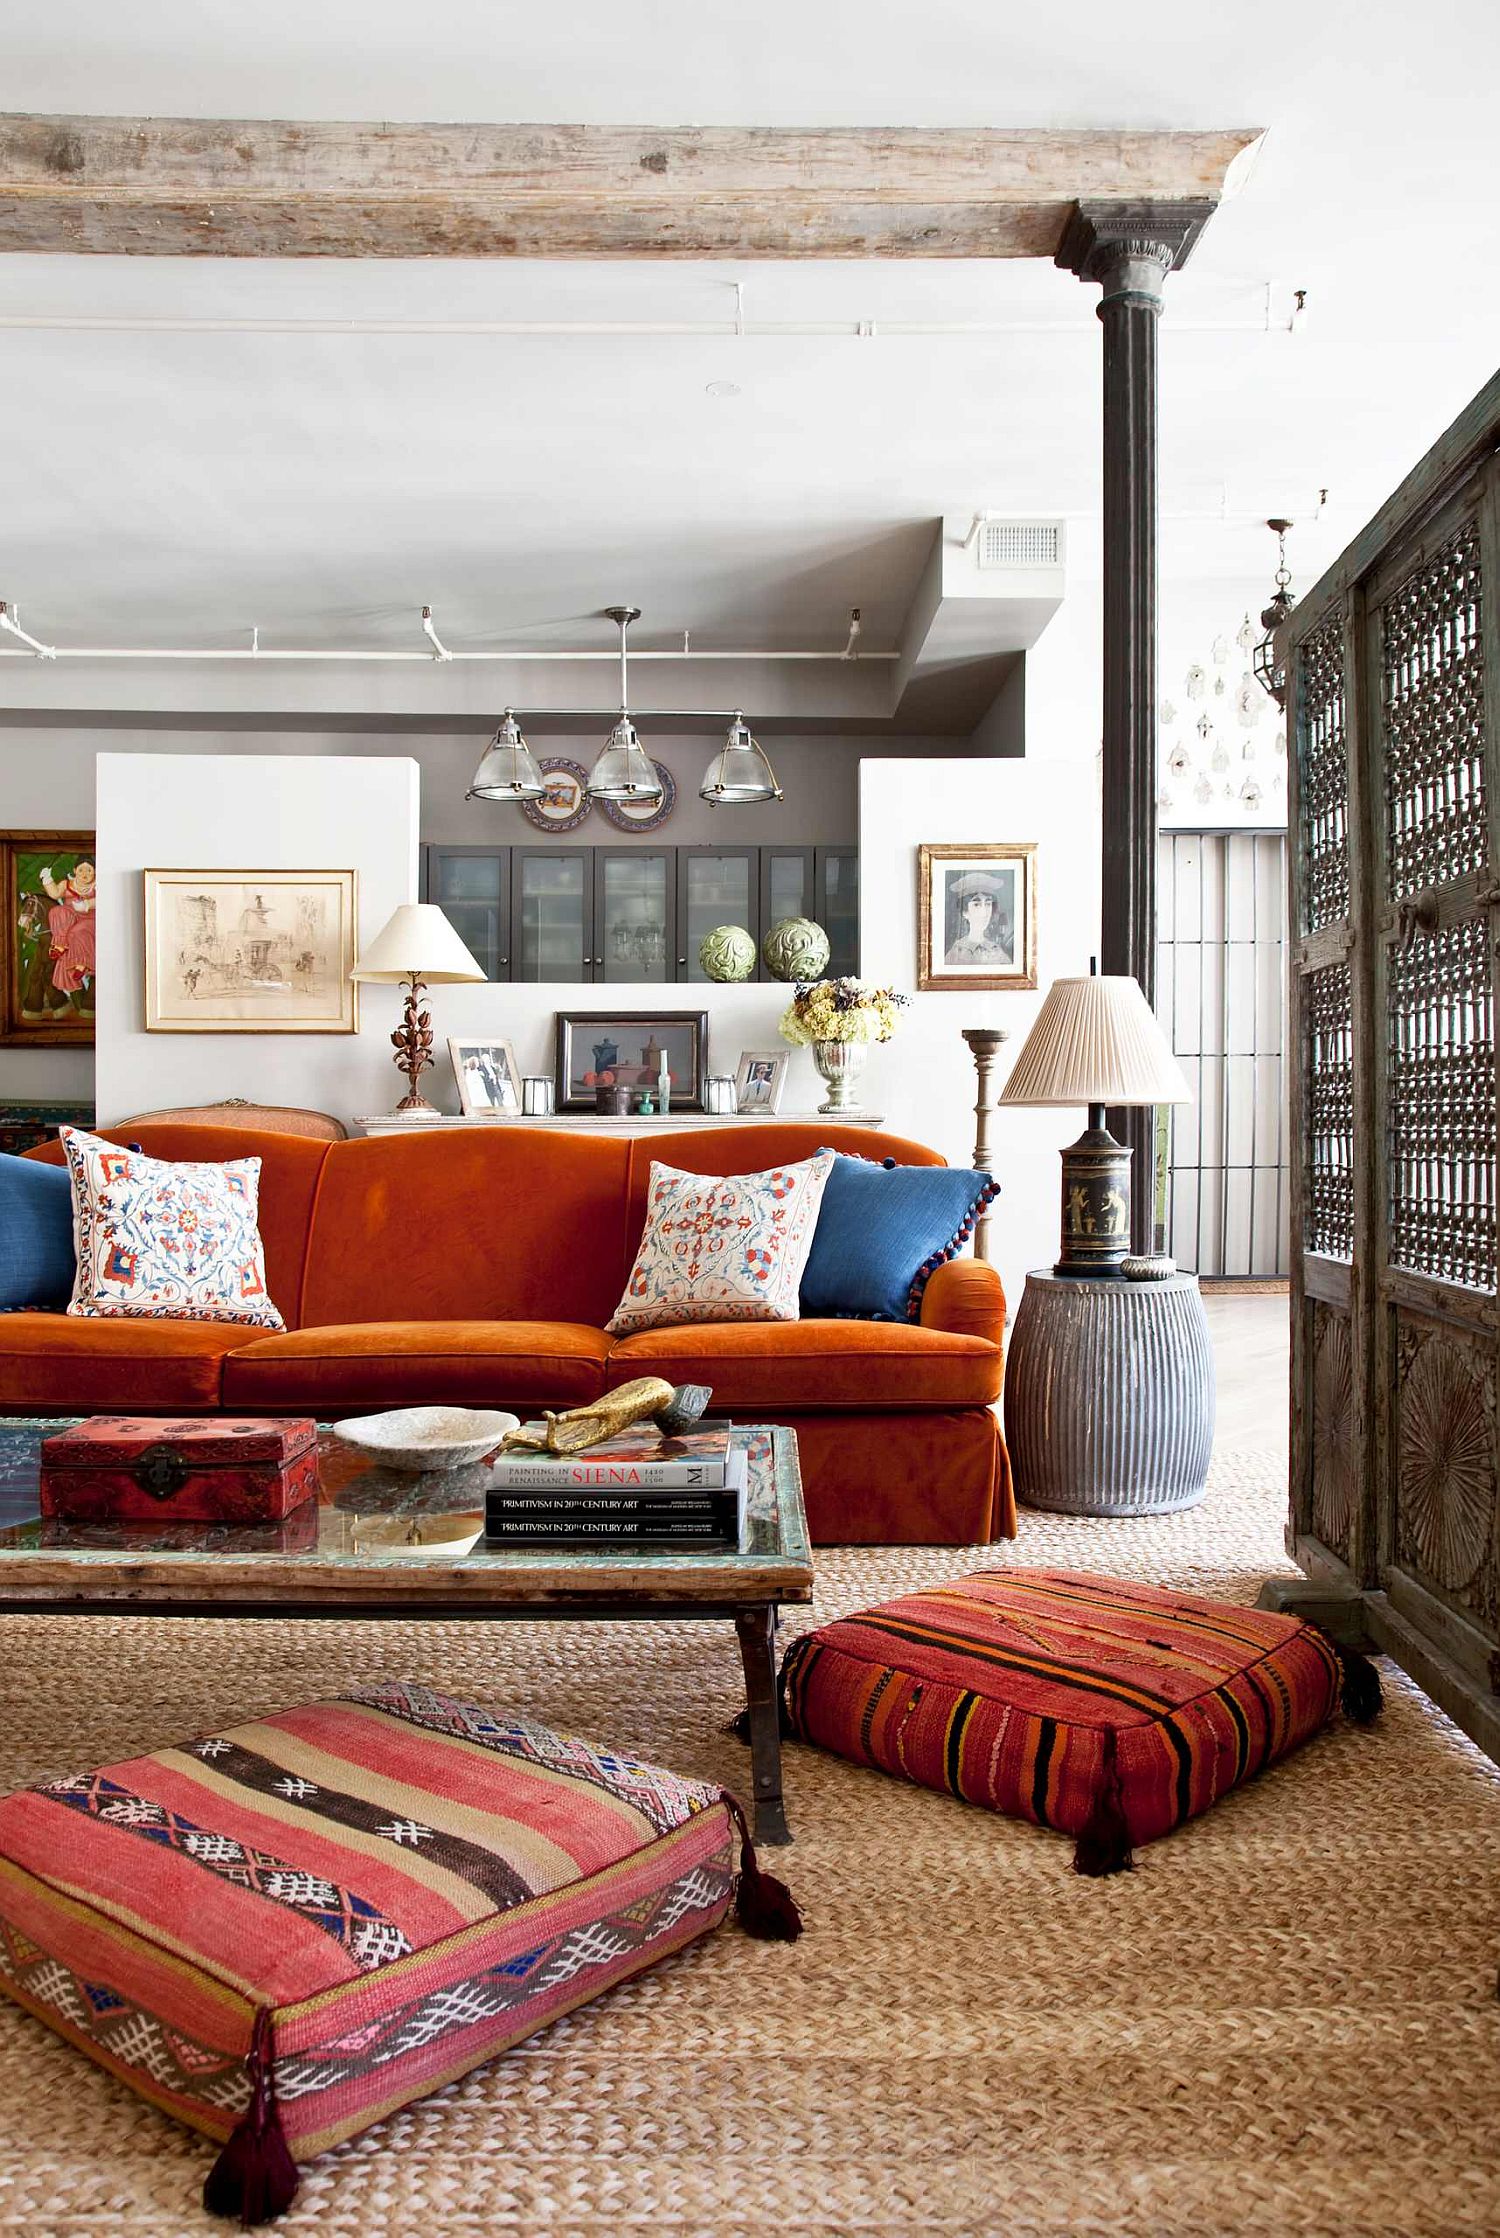 Bohemian style living room with pops of bright color everywhere